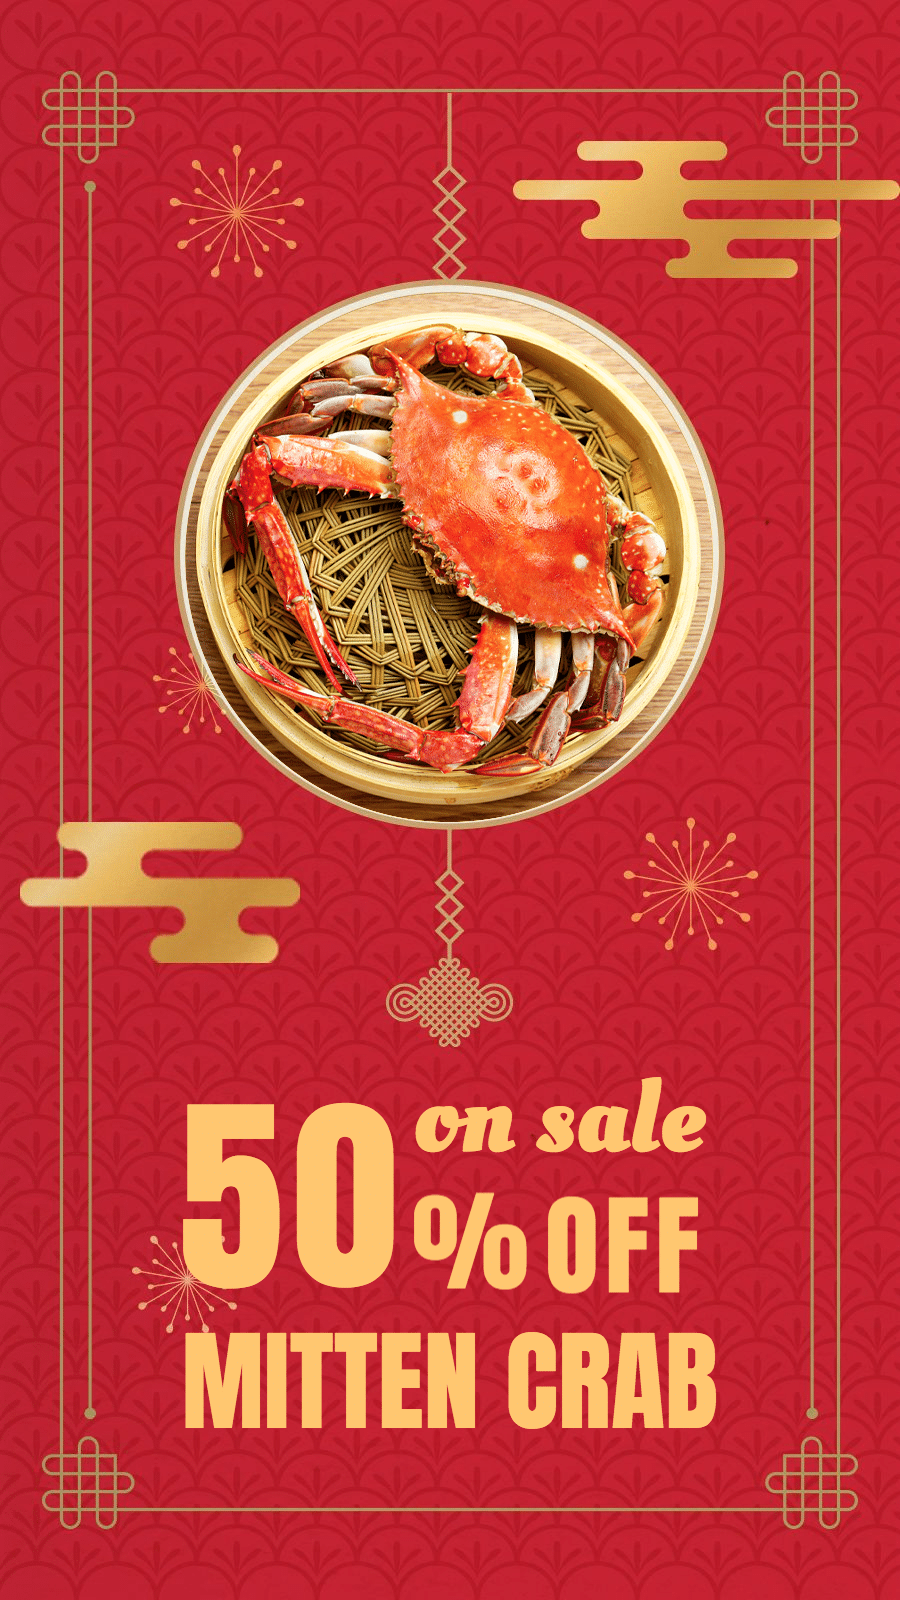 Creative Chinese Food Discount Promo Instagram Story